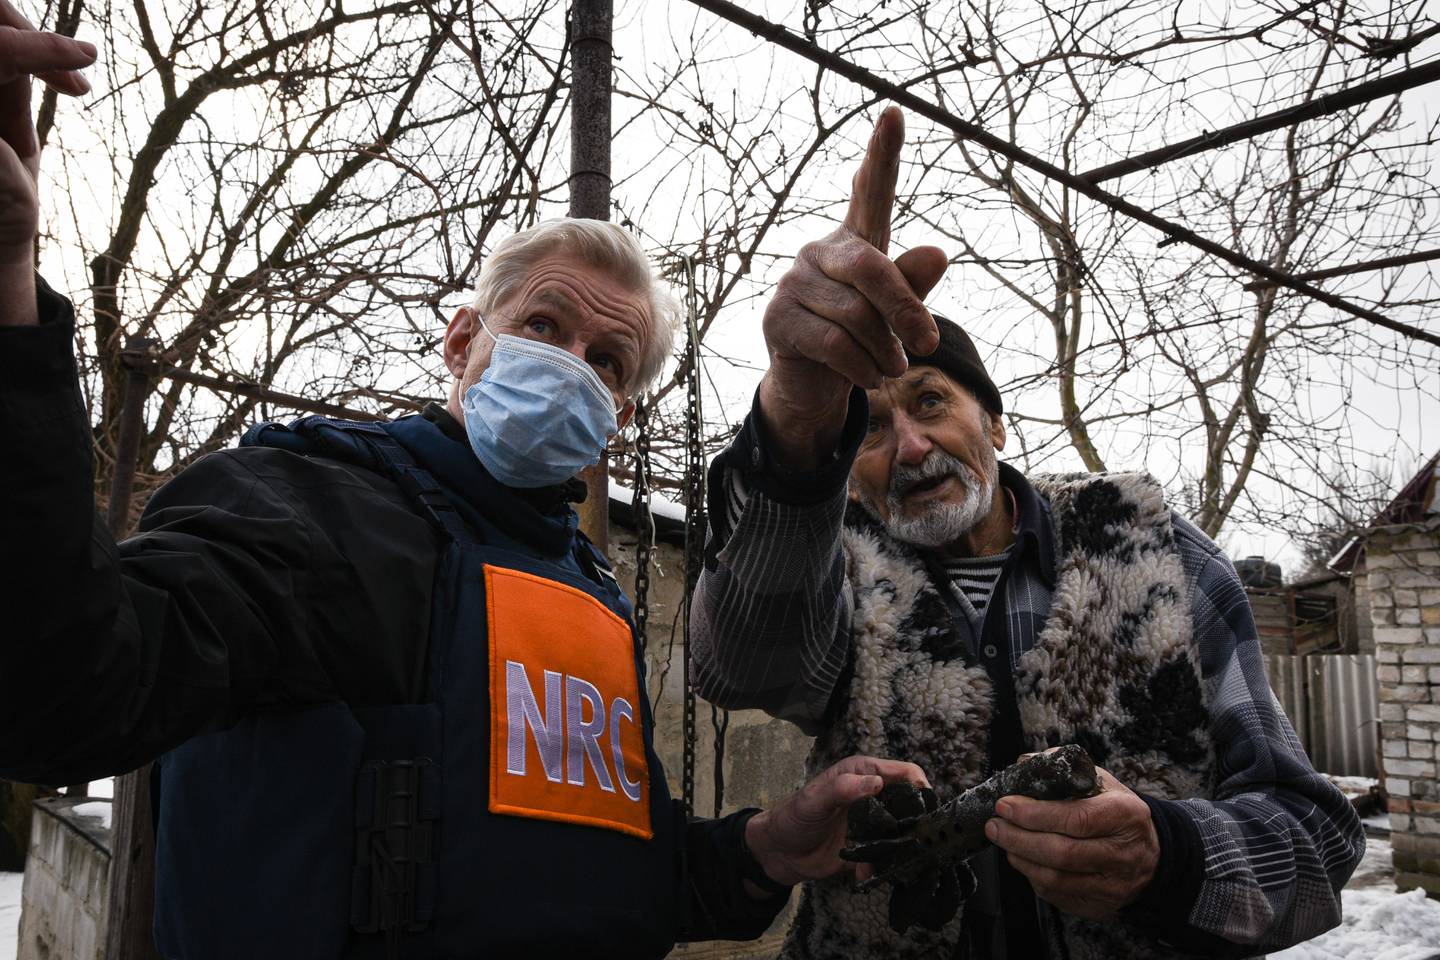 Mykola’s (83) home near the frontline outside Marrinka city in Donetsk region was substantially damaged in several shelling events in 2015-2016, large parts of his roof was destroyed and windows shattered. NRC has provided him with financial assistance for construction material and works and Mykola has been able to install new windows and repair the roof.